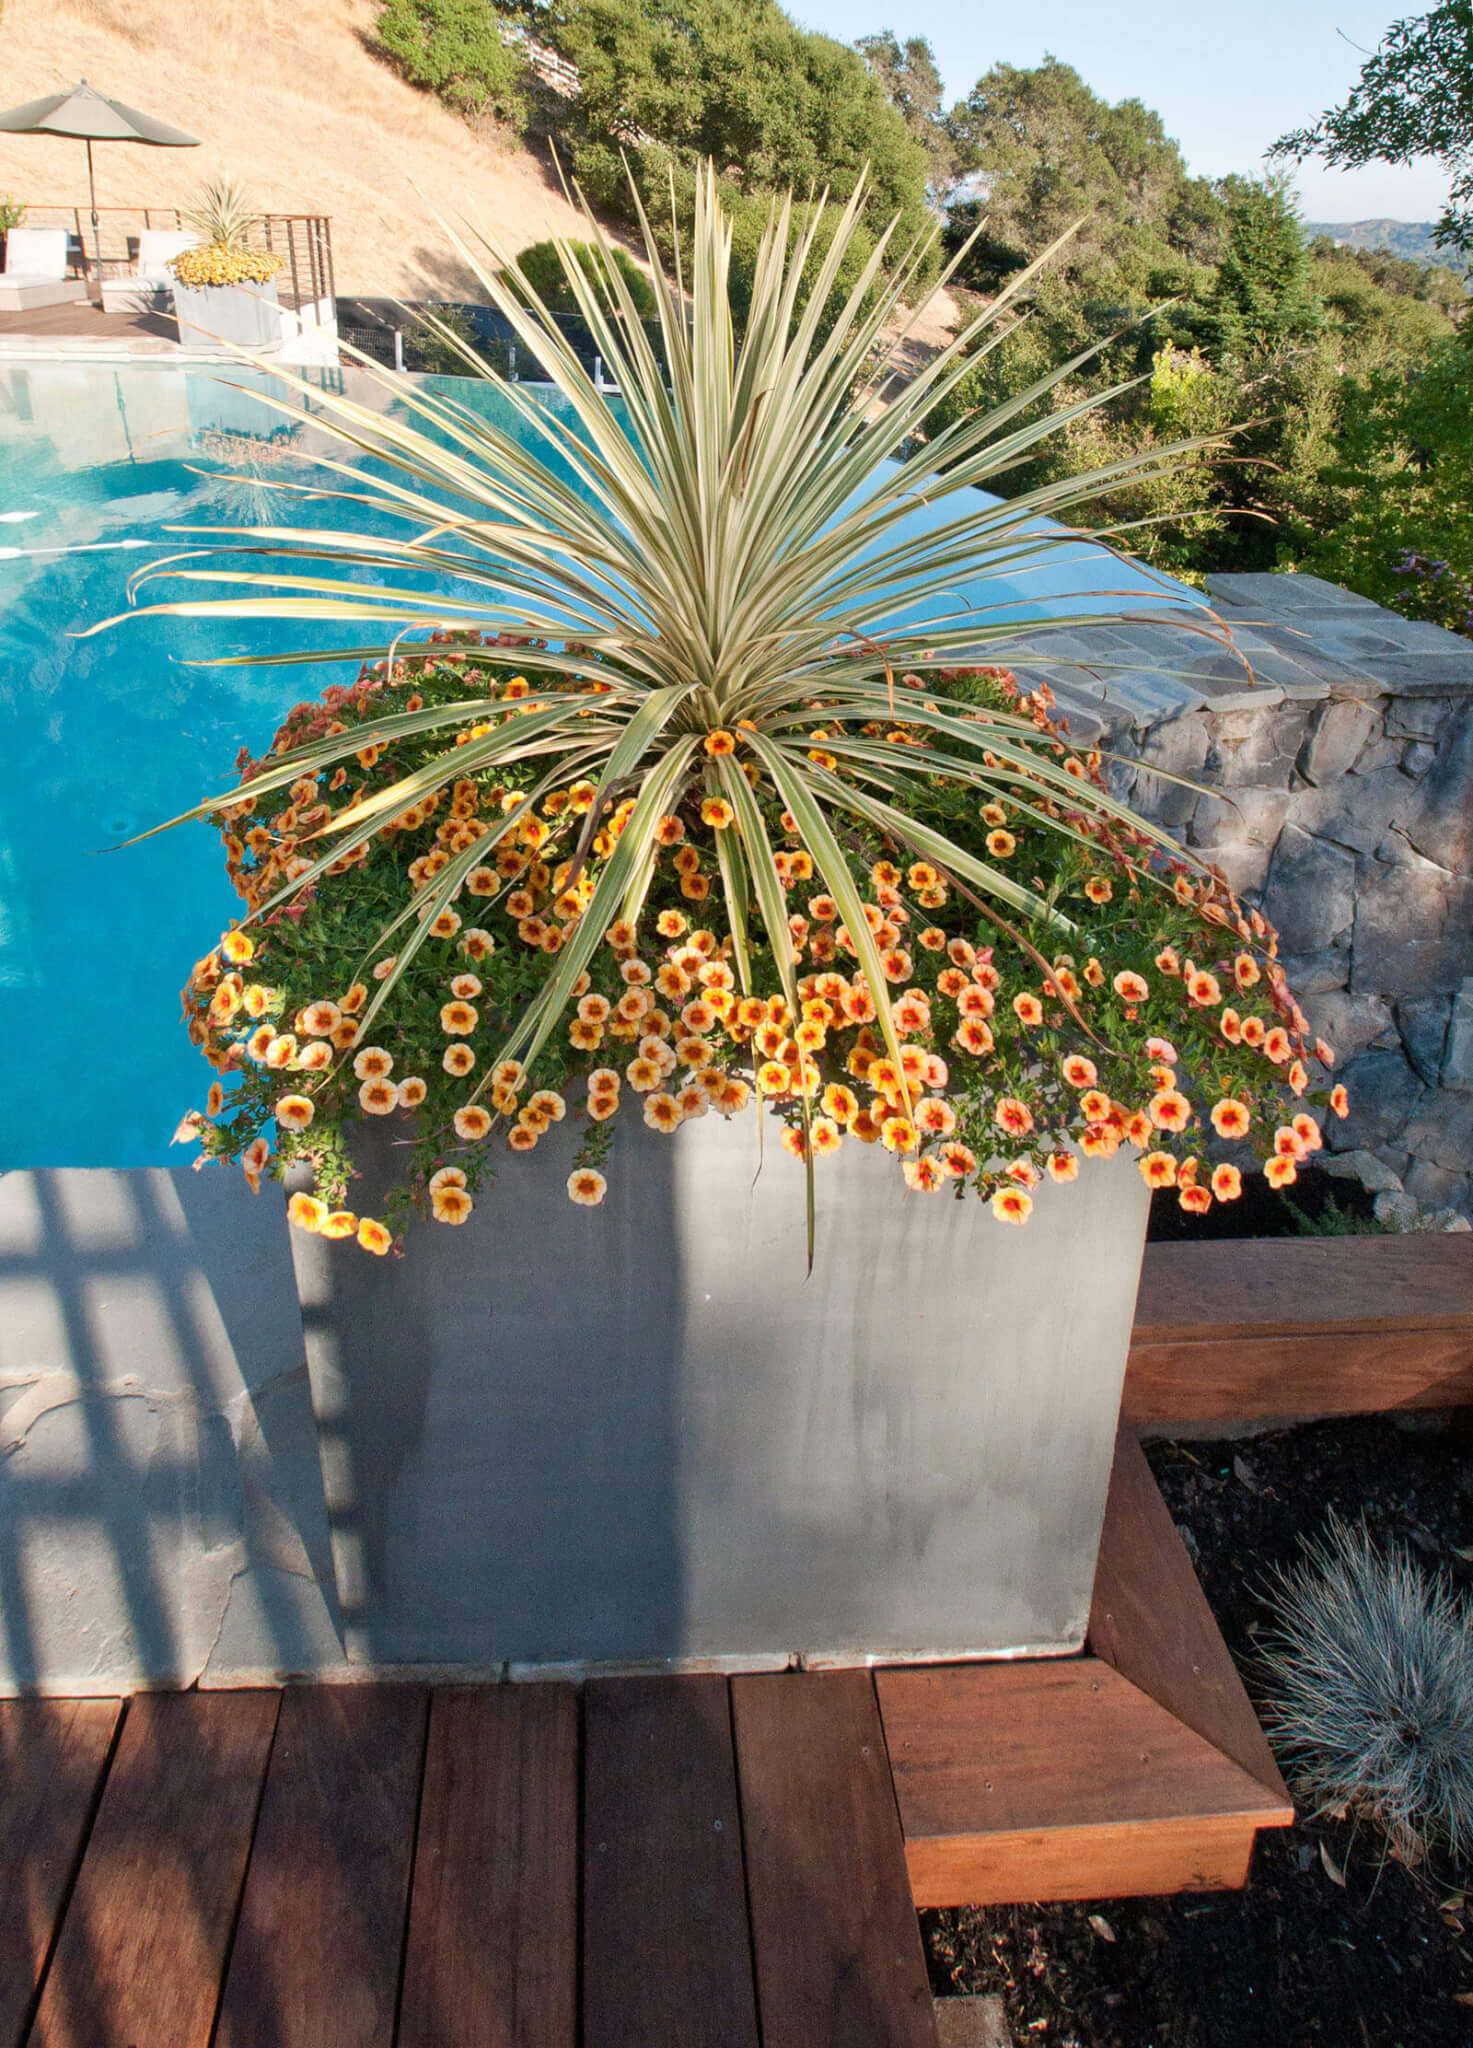 center shot of cubed stone flowerpot in front of an edge-less pool, overflowing with bright vibrant flowers